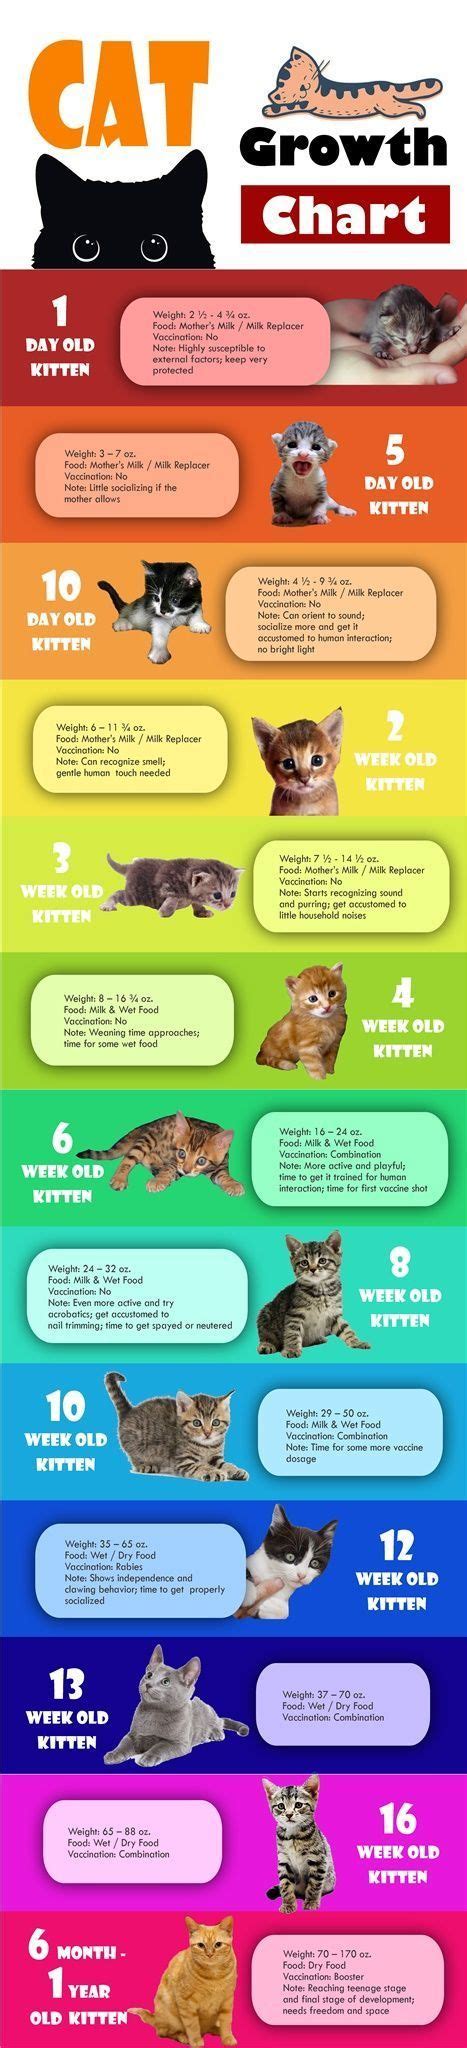 Infographic Kitten Cat Growth Chart By Age Weight And Food Source